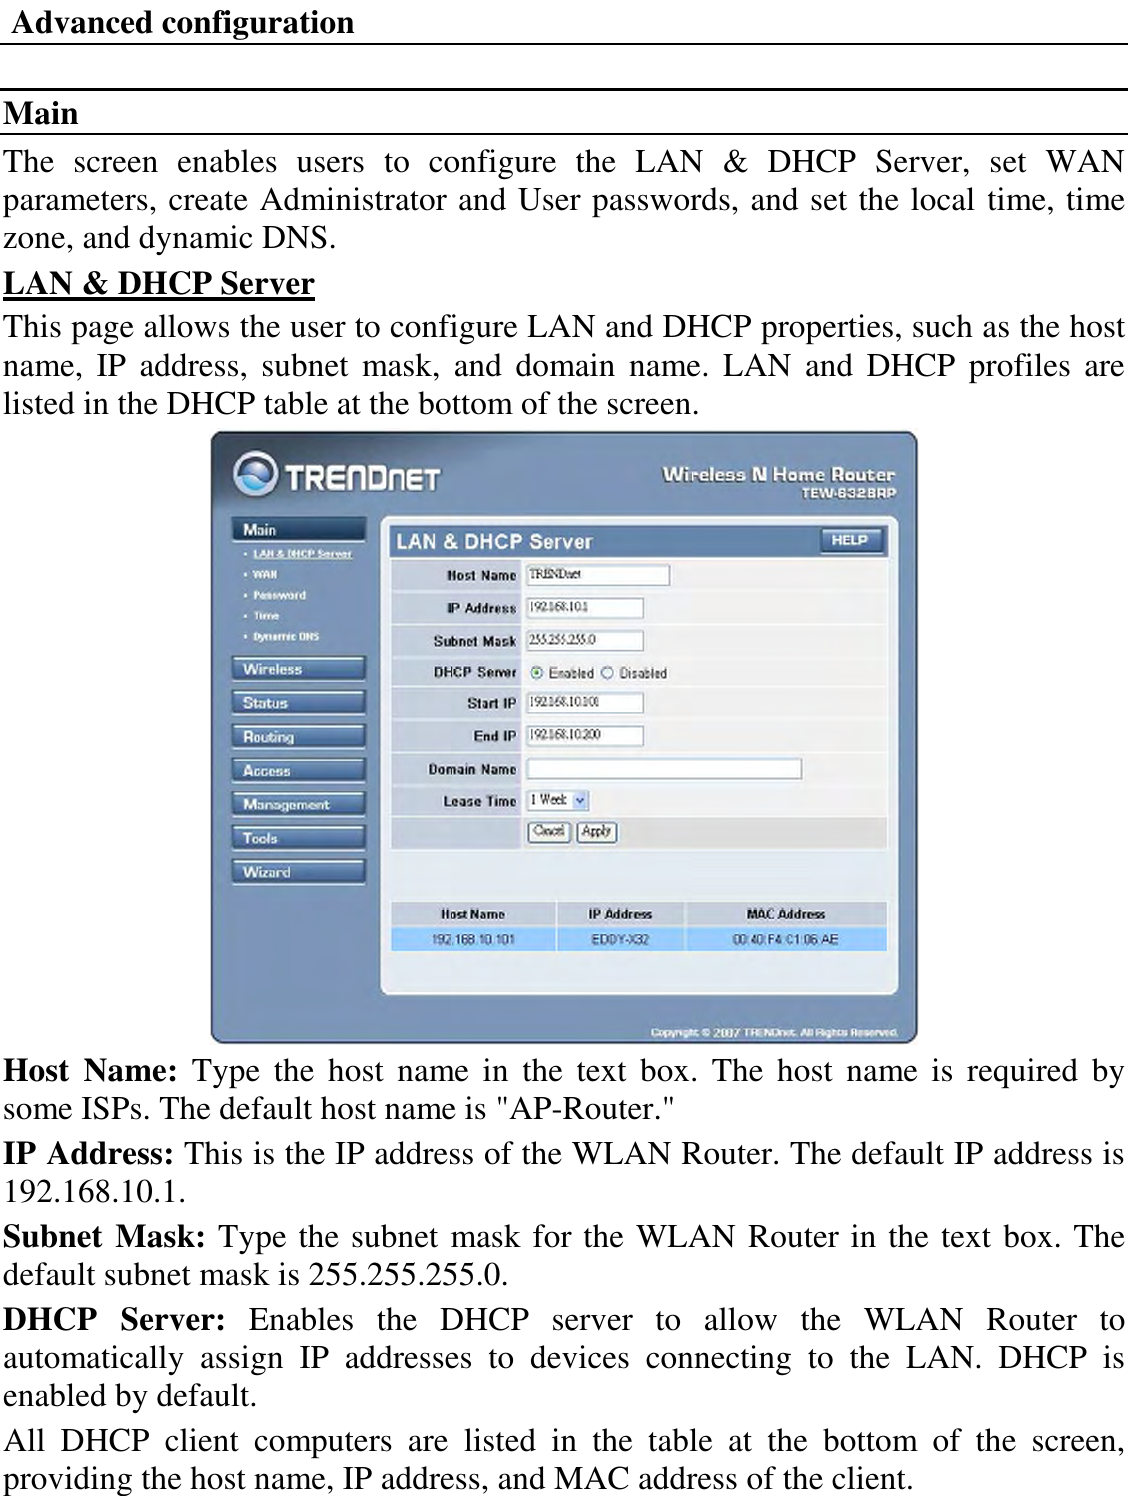  Advanced configuration  Main The  screen  enables  users  to  configure  the  LAN  &amp;  DHCP  Server,  set  WAN parameters, create Administrator and User passwords, and set the local time, time zone, and dynamic DNS. LAN &amp; DHCP Server This page allows the user to configure LAN and DHCP properties, such as the host name,  IP  address,  subnet  mask,  and  domain  name.  LAN  and DHCP  profiles  are listed in the DHCP table at the bottom of the screen.  Host  Name:  Type  the  host  name  in  the  text  box.  The  host  name is  required  by some ISPs. The default host name is &quot;AP-Router.&quot; IP Address: This is the IP address of the WLAN Router. The default IP address is 192.168.10.1. Subnet Mask: Type the subnet mask for the WLAN Router in the text box. The default subnet mask is 255.255.255.0. DHCP  Server:  Enables  the  DHCP  server  to  allow  the  WLAN  Router  to automatically  assign  IP  addresses  to  devices  connecting  to  the  LAN.  DHCP  is enabled by default. All  DHCP  client  computers  are  listed  in  the  table  at  the  bottom  of  the  screen, providing the host name, IP address, and MAC address of the client. 